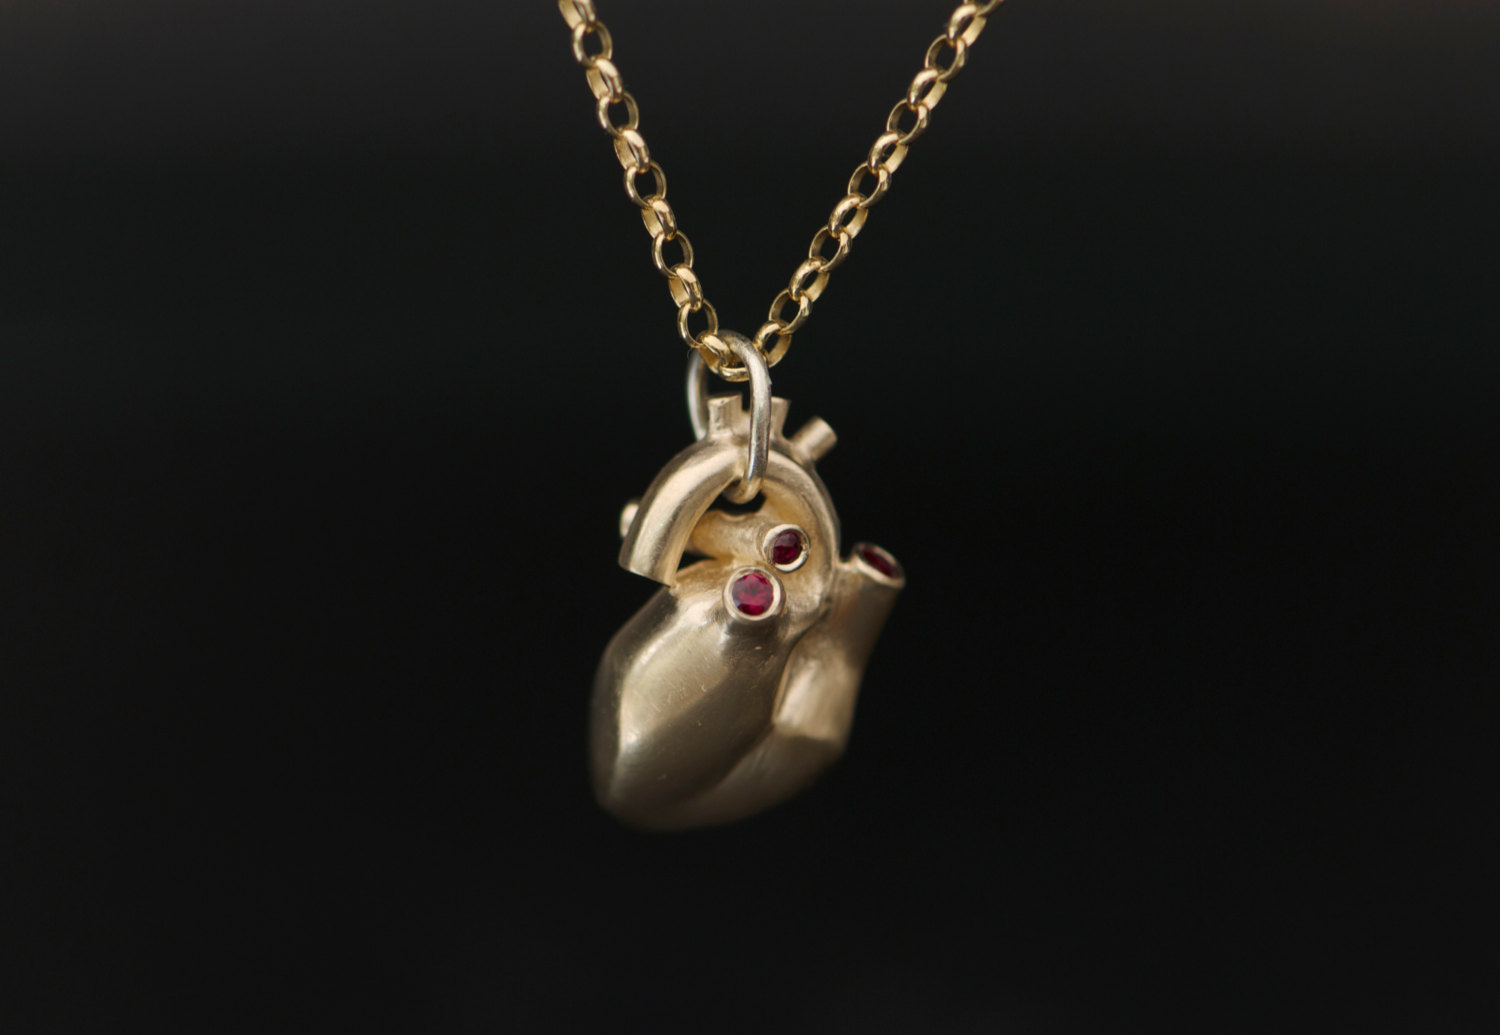 Anatomical heart necklace with 4 small rubies, set in 9K gold. Solid gold heart on a medium weight 9K gold chain. Designed & handmade by William White